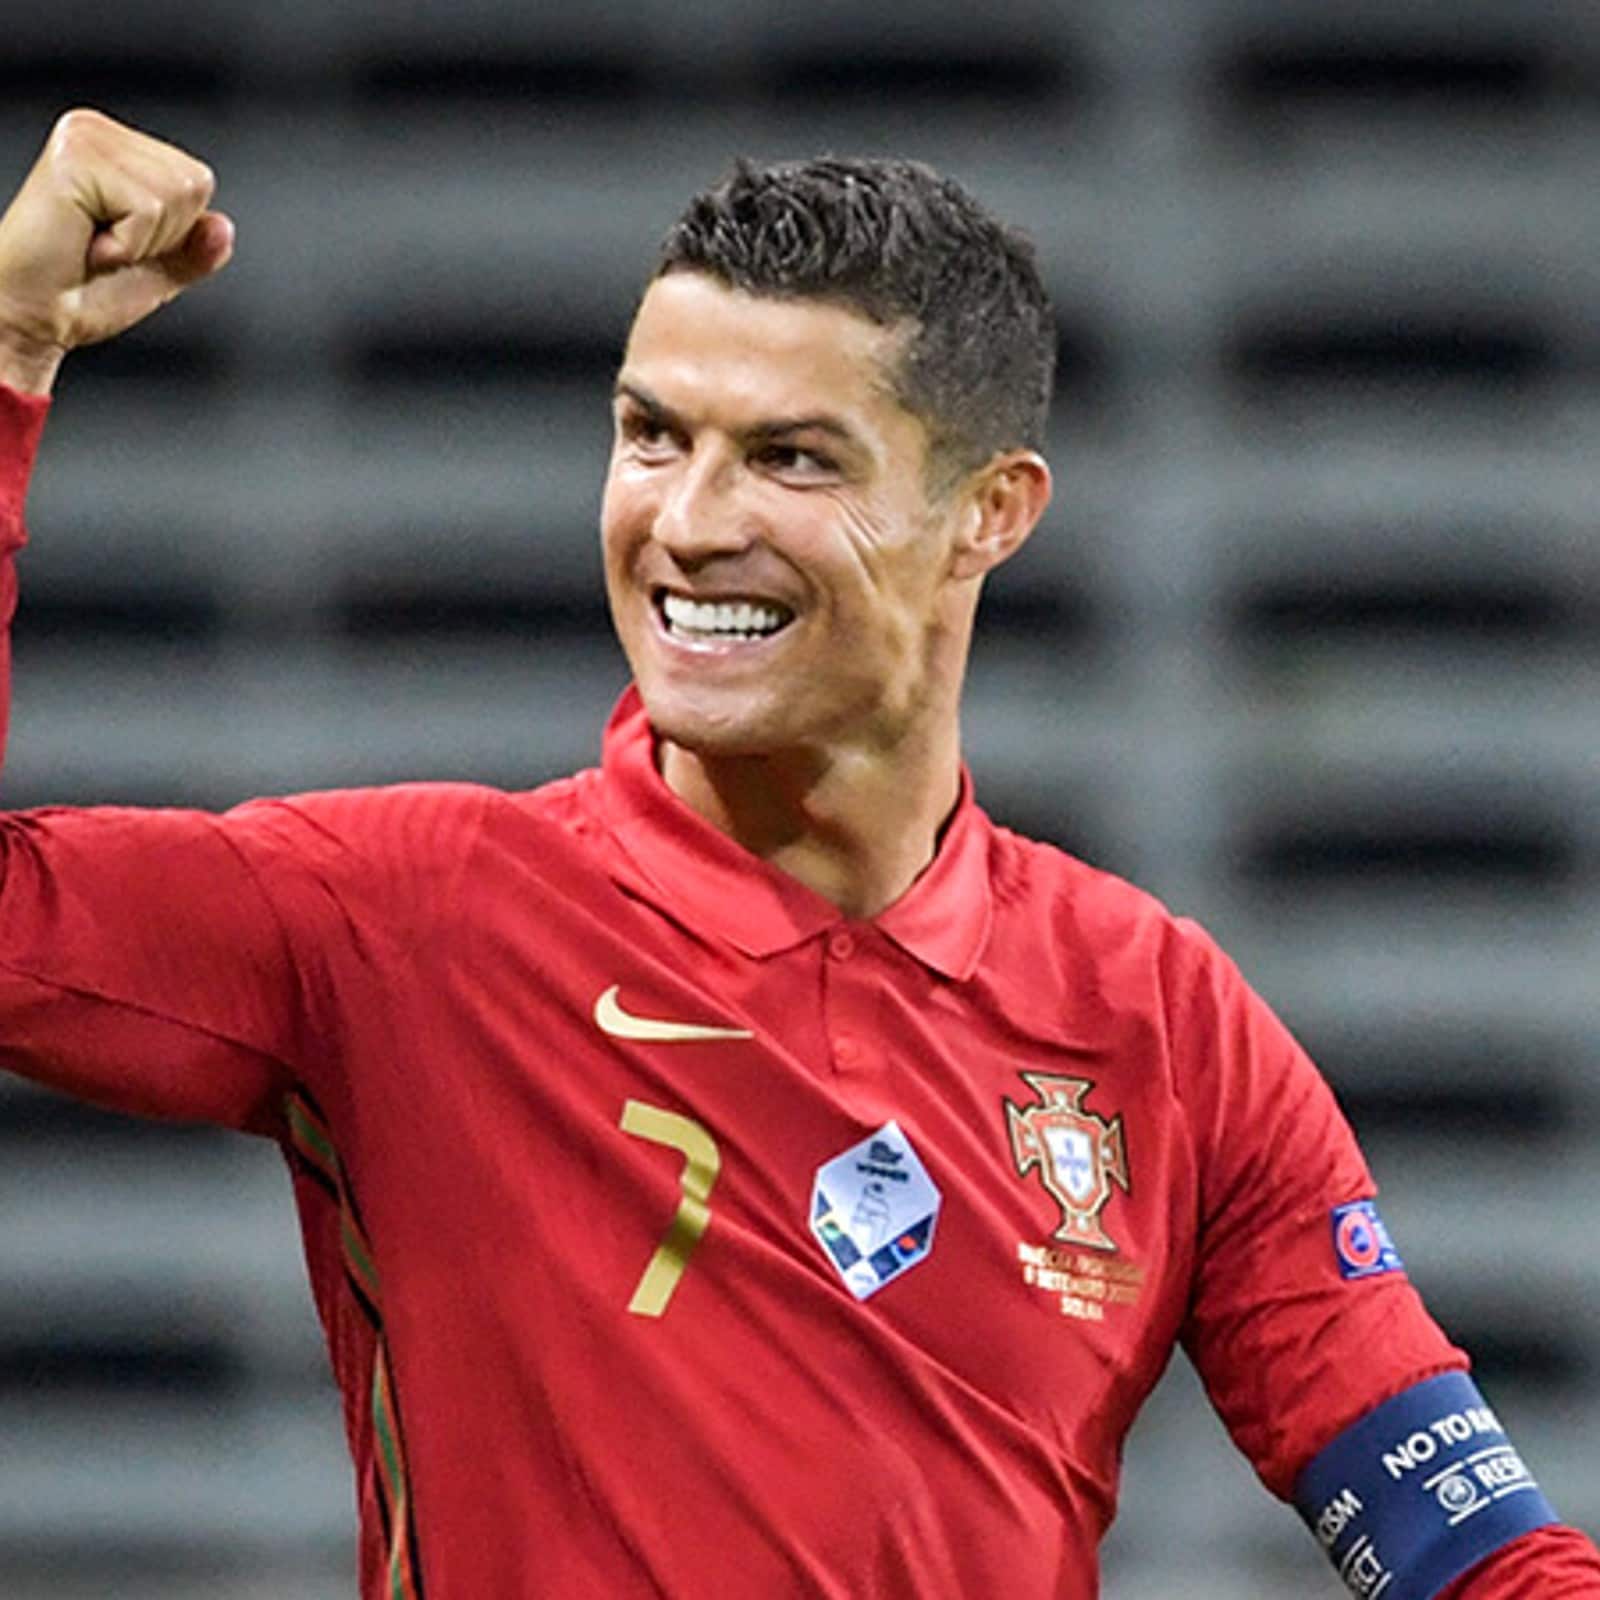 2022 FIFA World Cup qualifiers Portugal vs Turkey LIVE Streaming When and Where to Watch Online, TV Telecast, Team News